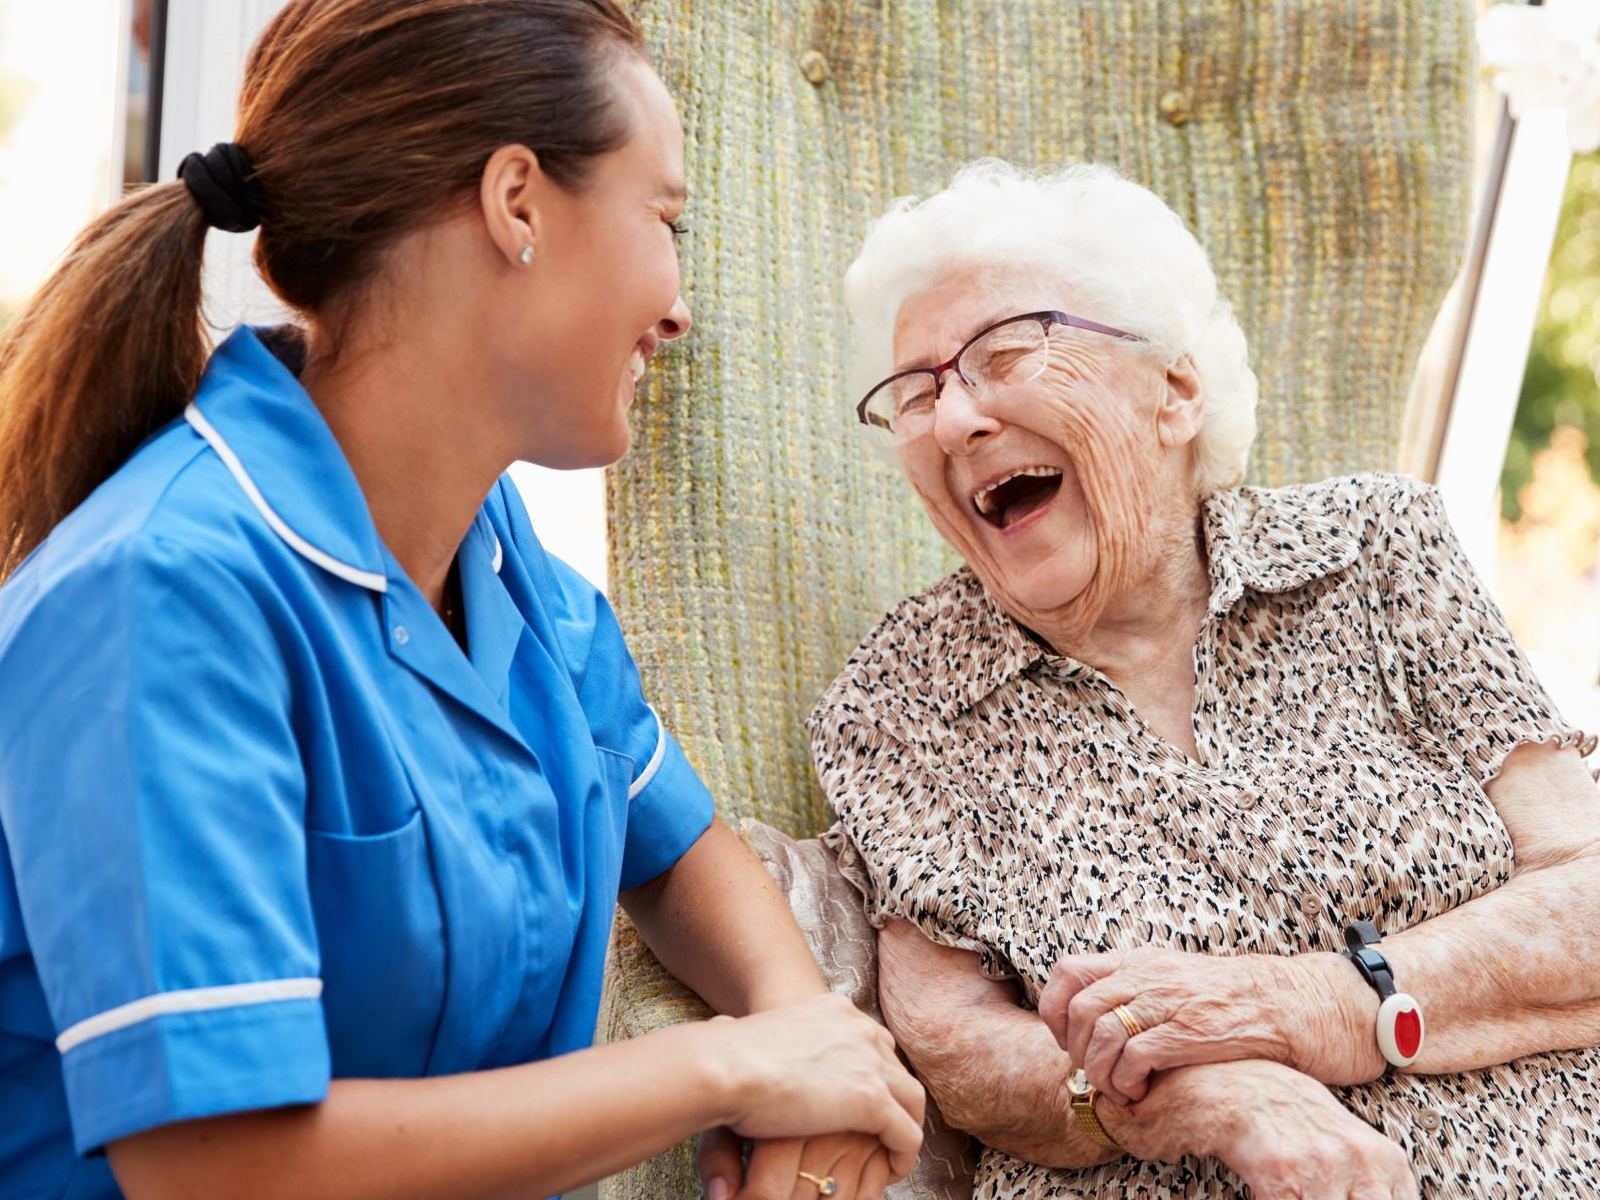 A nurse attending to a smiling patient as part of community care